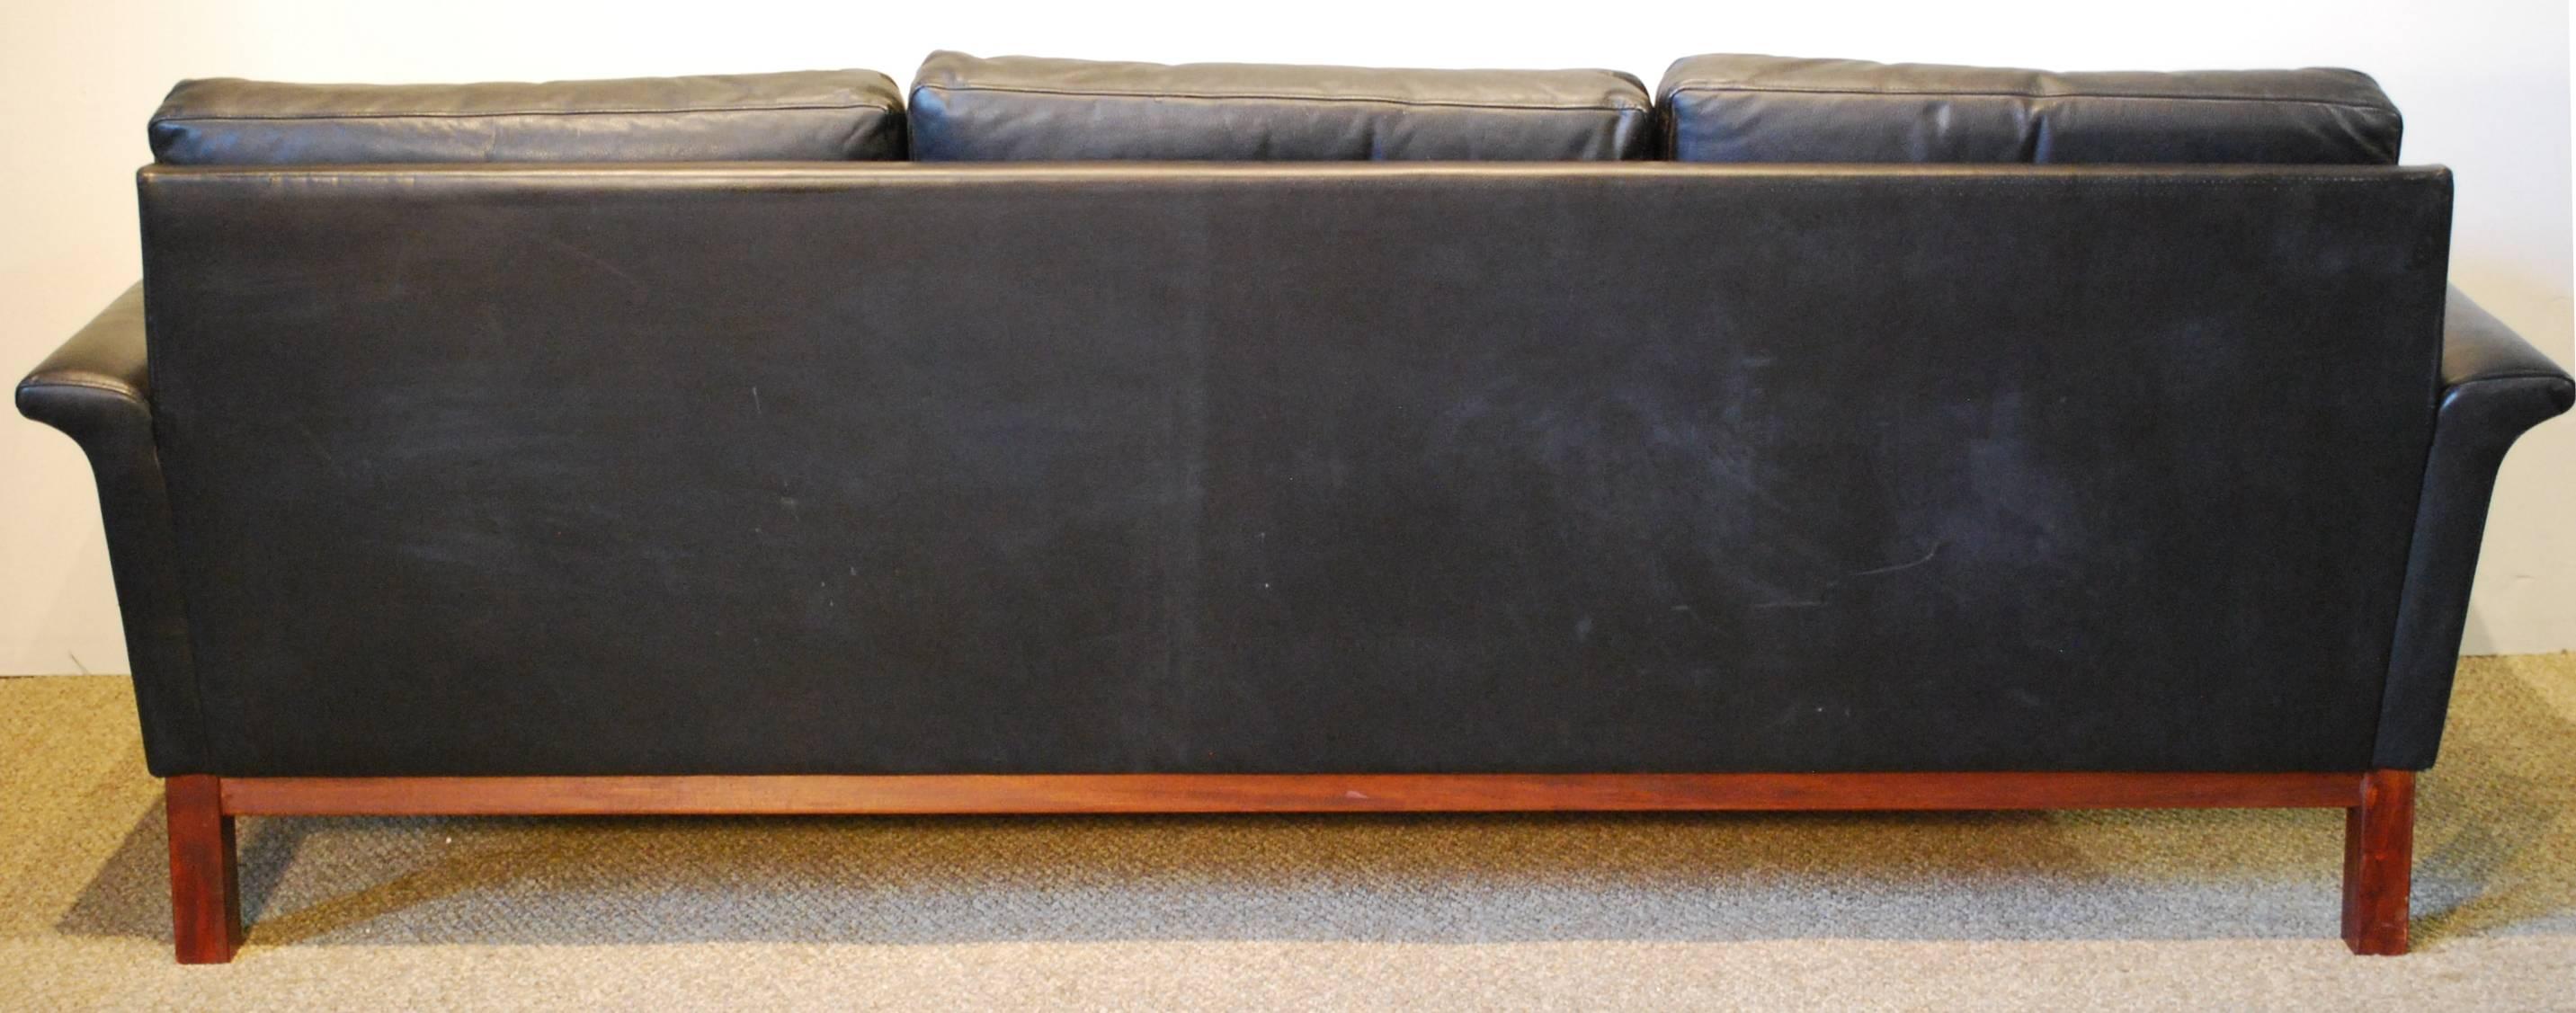 A Hans Hansen designed Danish modern full grain black leather sofa featuring a Classic three cushion design with gracefully rolled armrests and a wooden base.